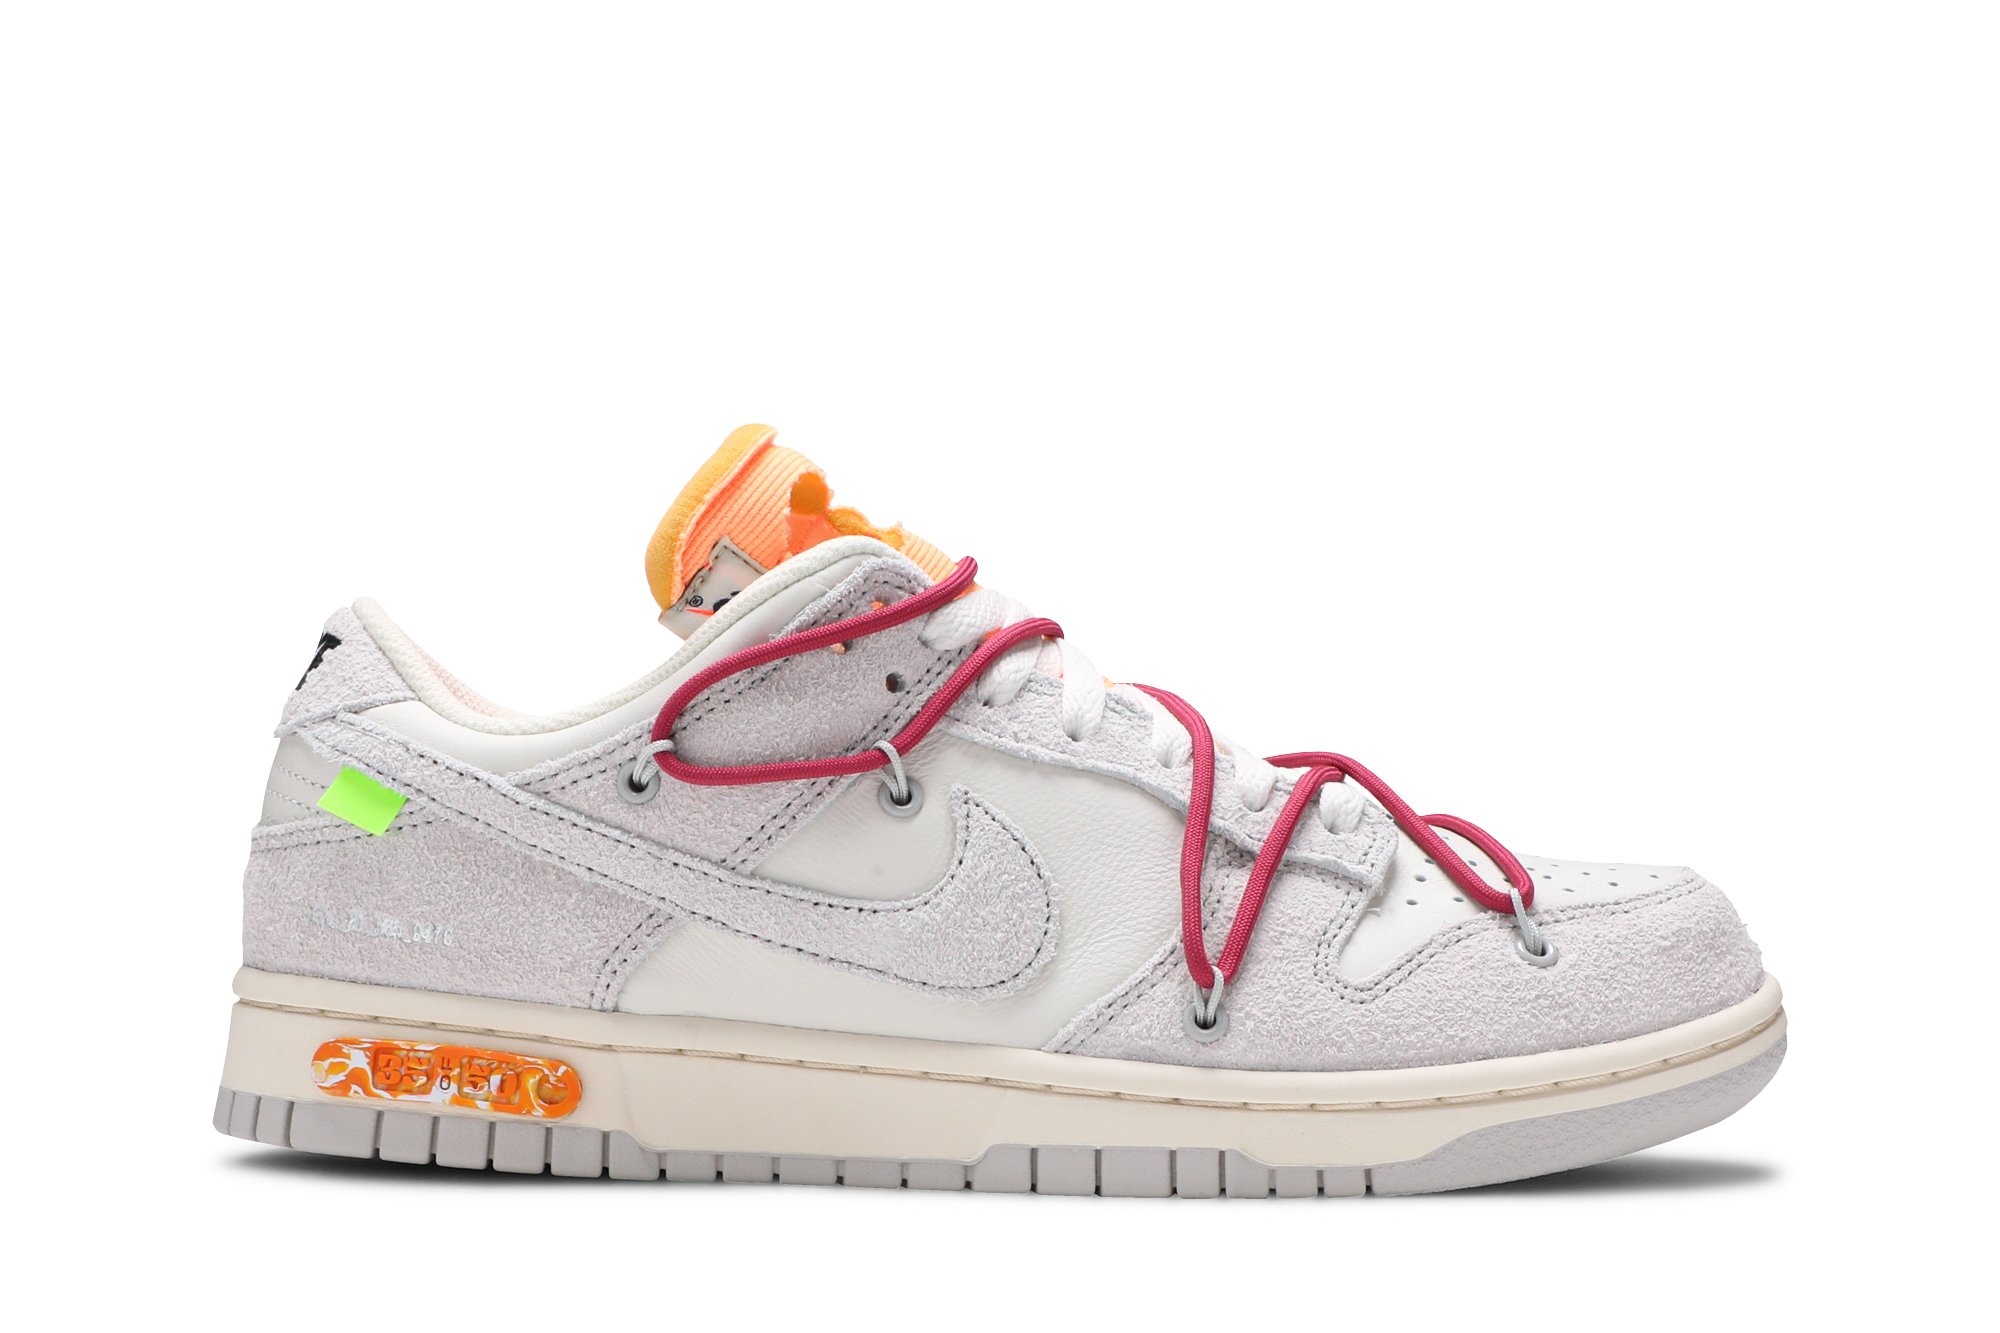 Buy Off-White x Dunk Low 'Lot 35 of 50' - DJ0950 114 | GOAT